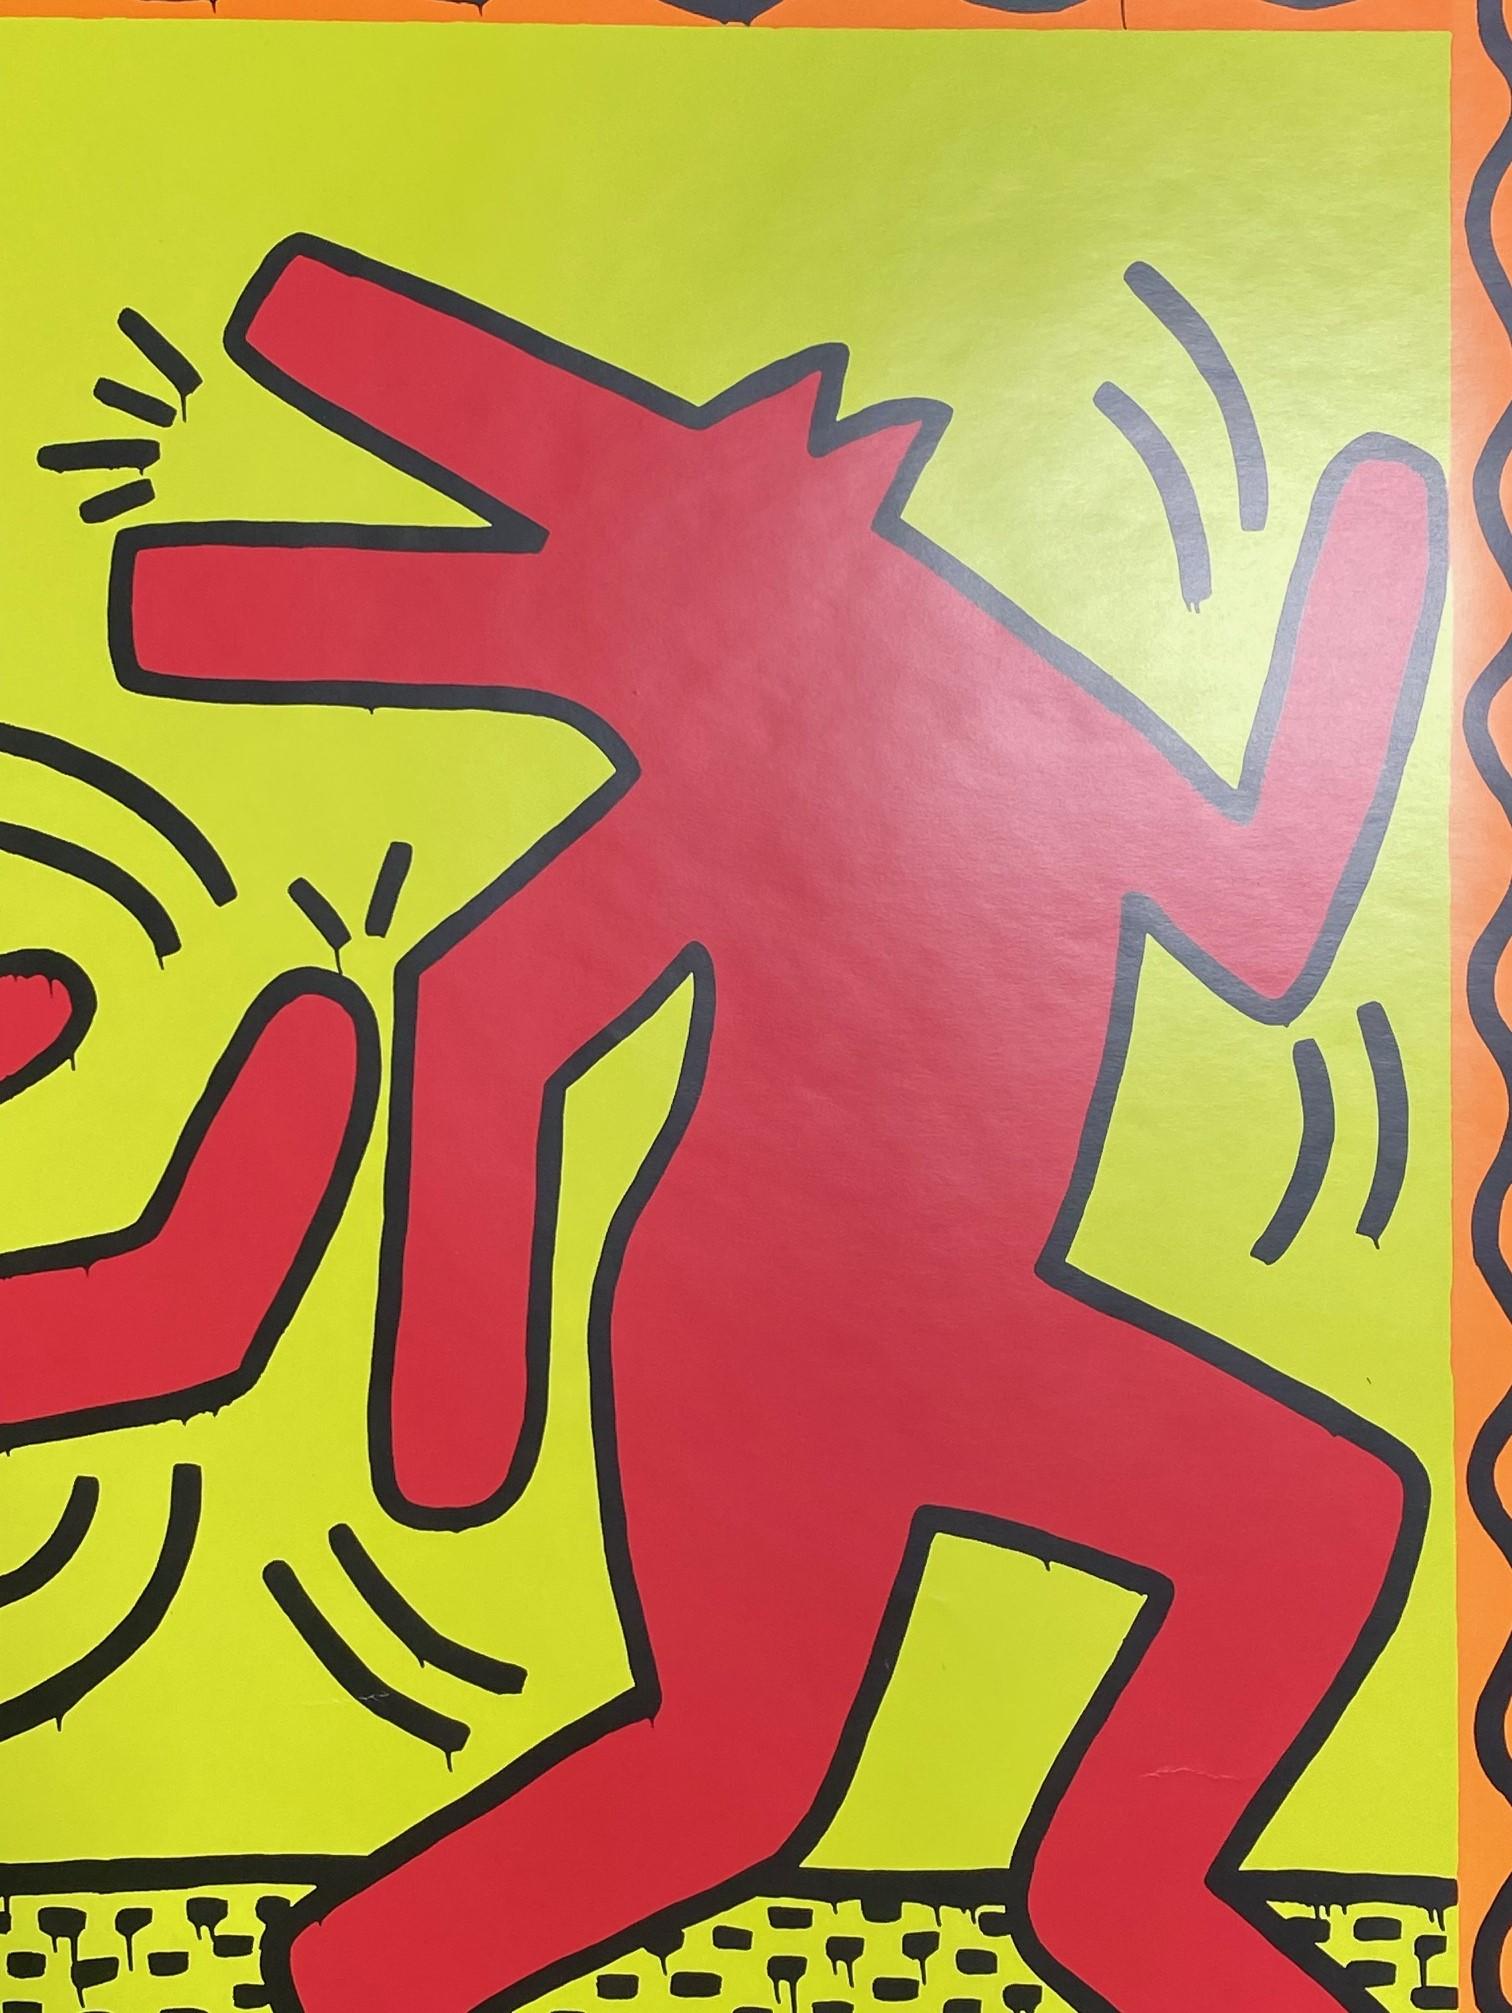 Paper Keith Haring Vintage NYC Pop Shop Art Lithograph Poster Dancing Dogs Wolves 1991 For Sale